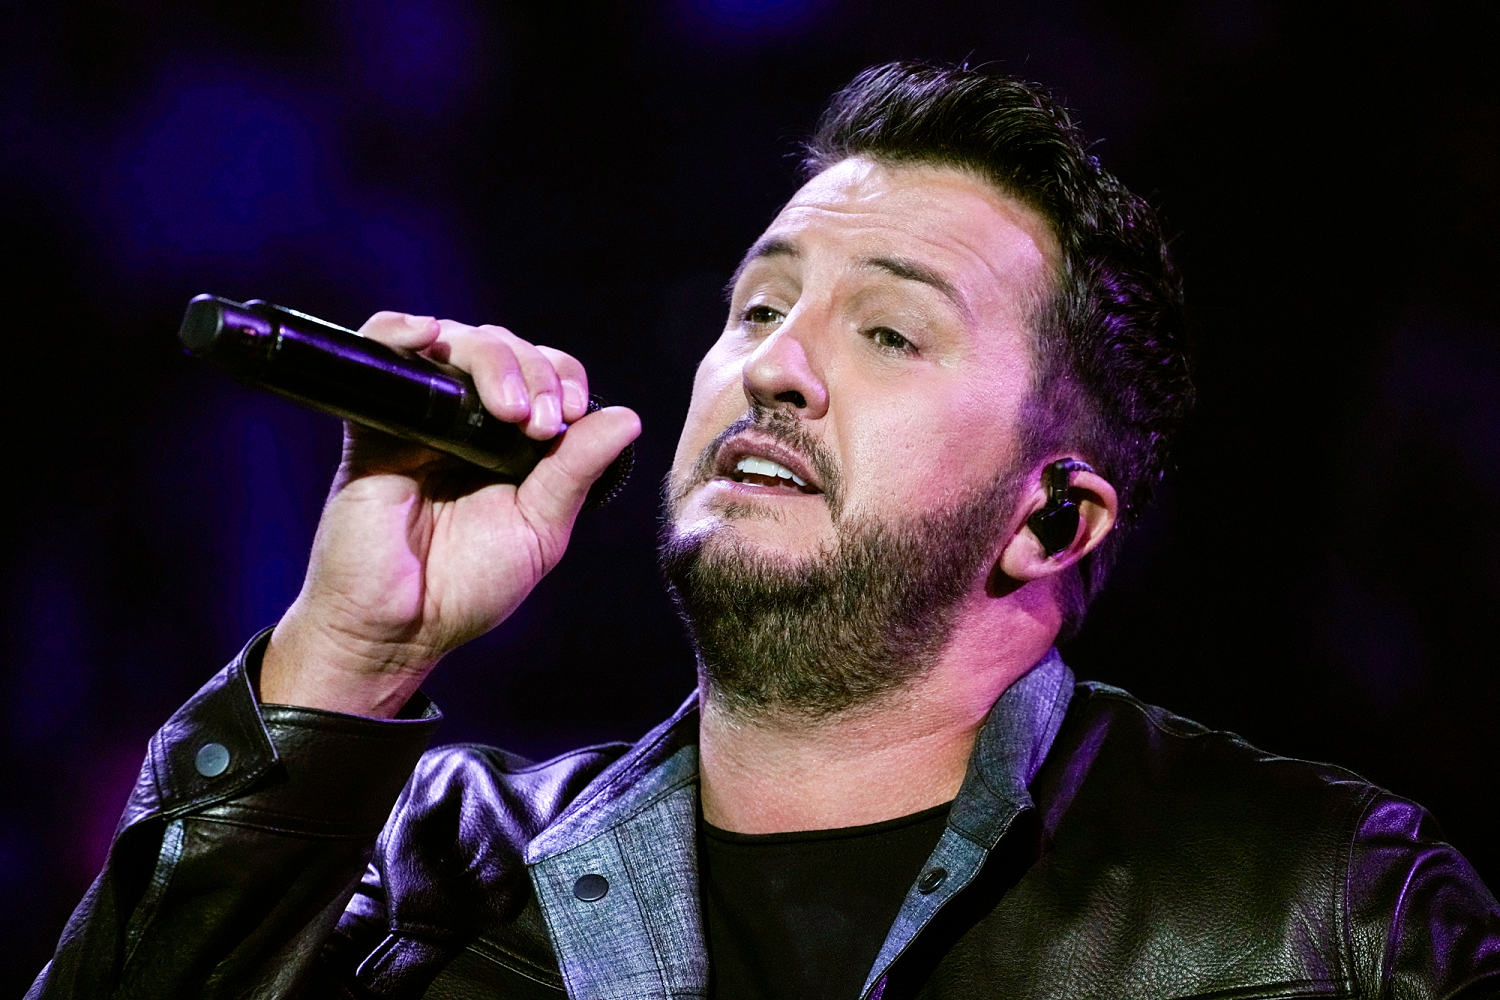 Luke Bryan slips on phone midshow — and fans praise him for 'grace and even humor'